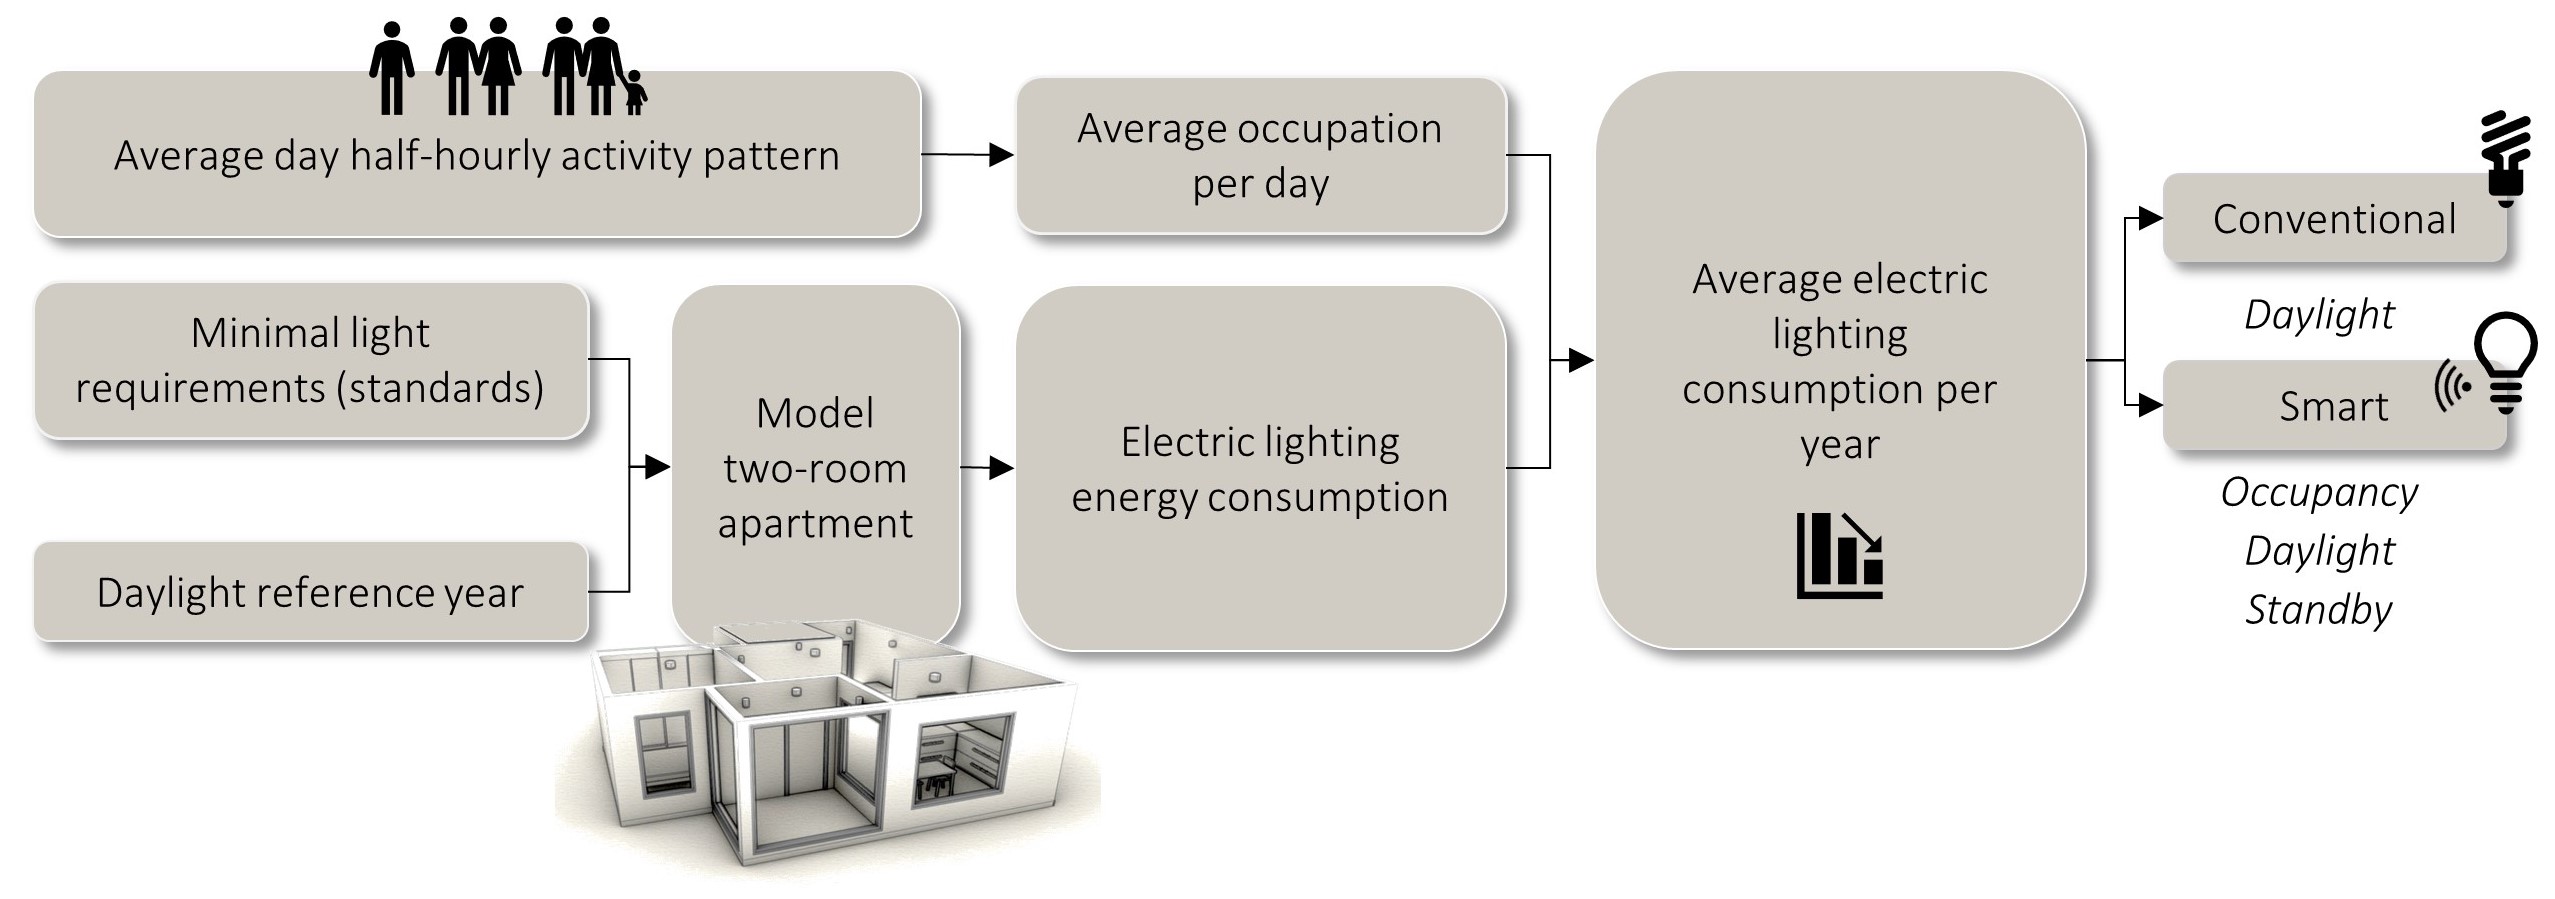 Schematic overview of the workflow in the light simulation study